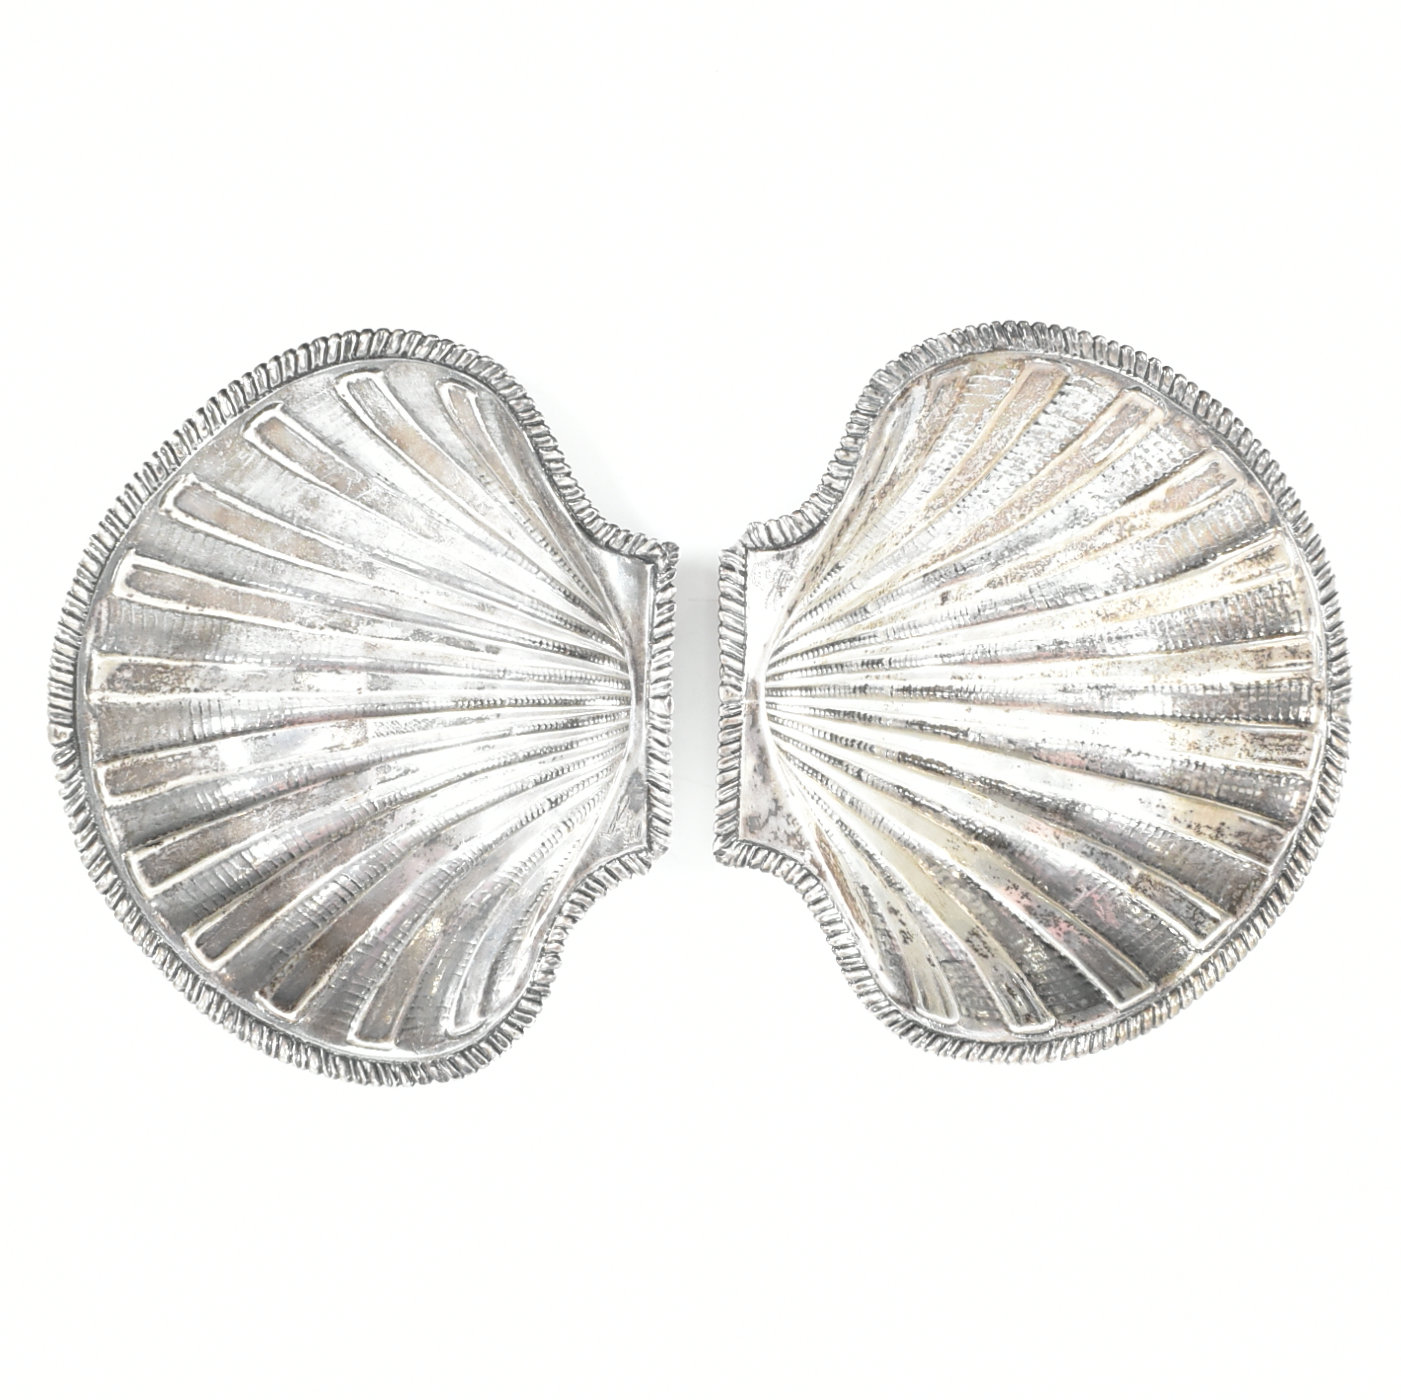 TWO SILVER SCALLOP SHELL SALT DISHES - Image 3 of 5